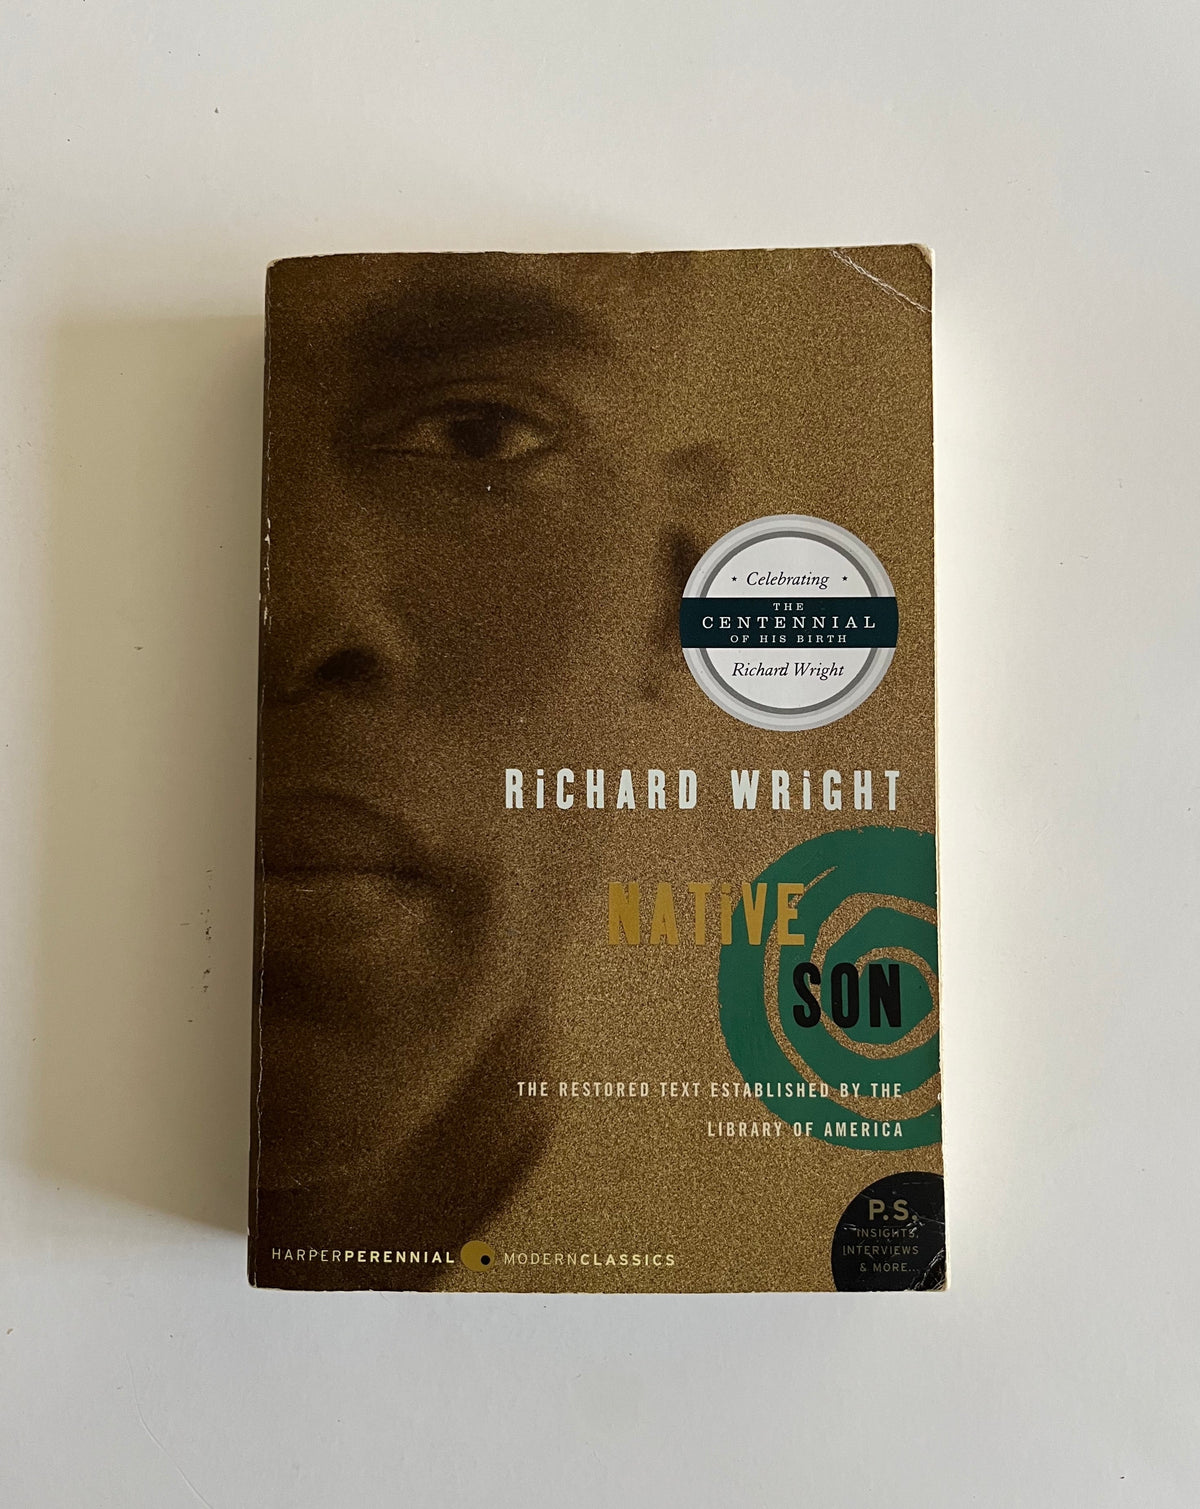 DONATE: Native Son by Richard Wright